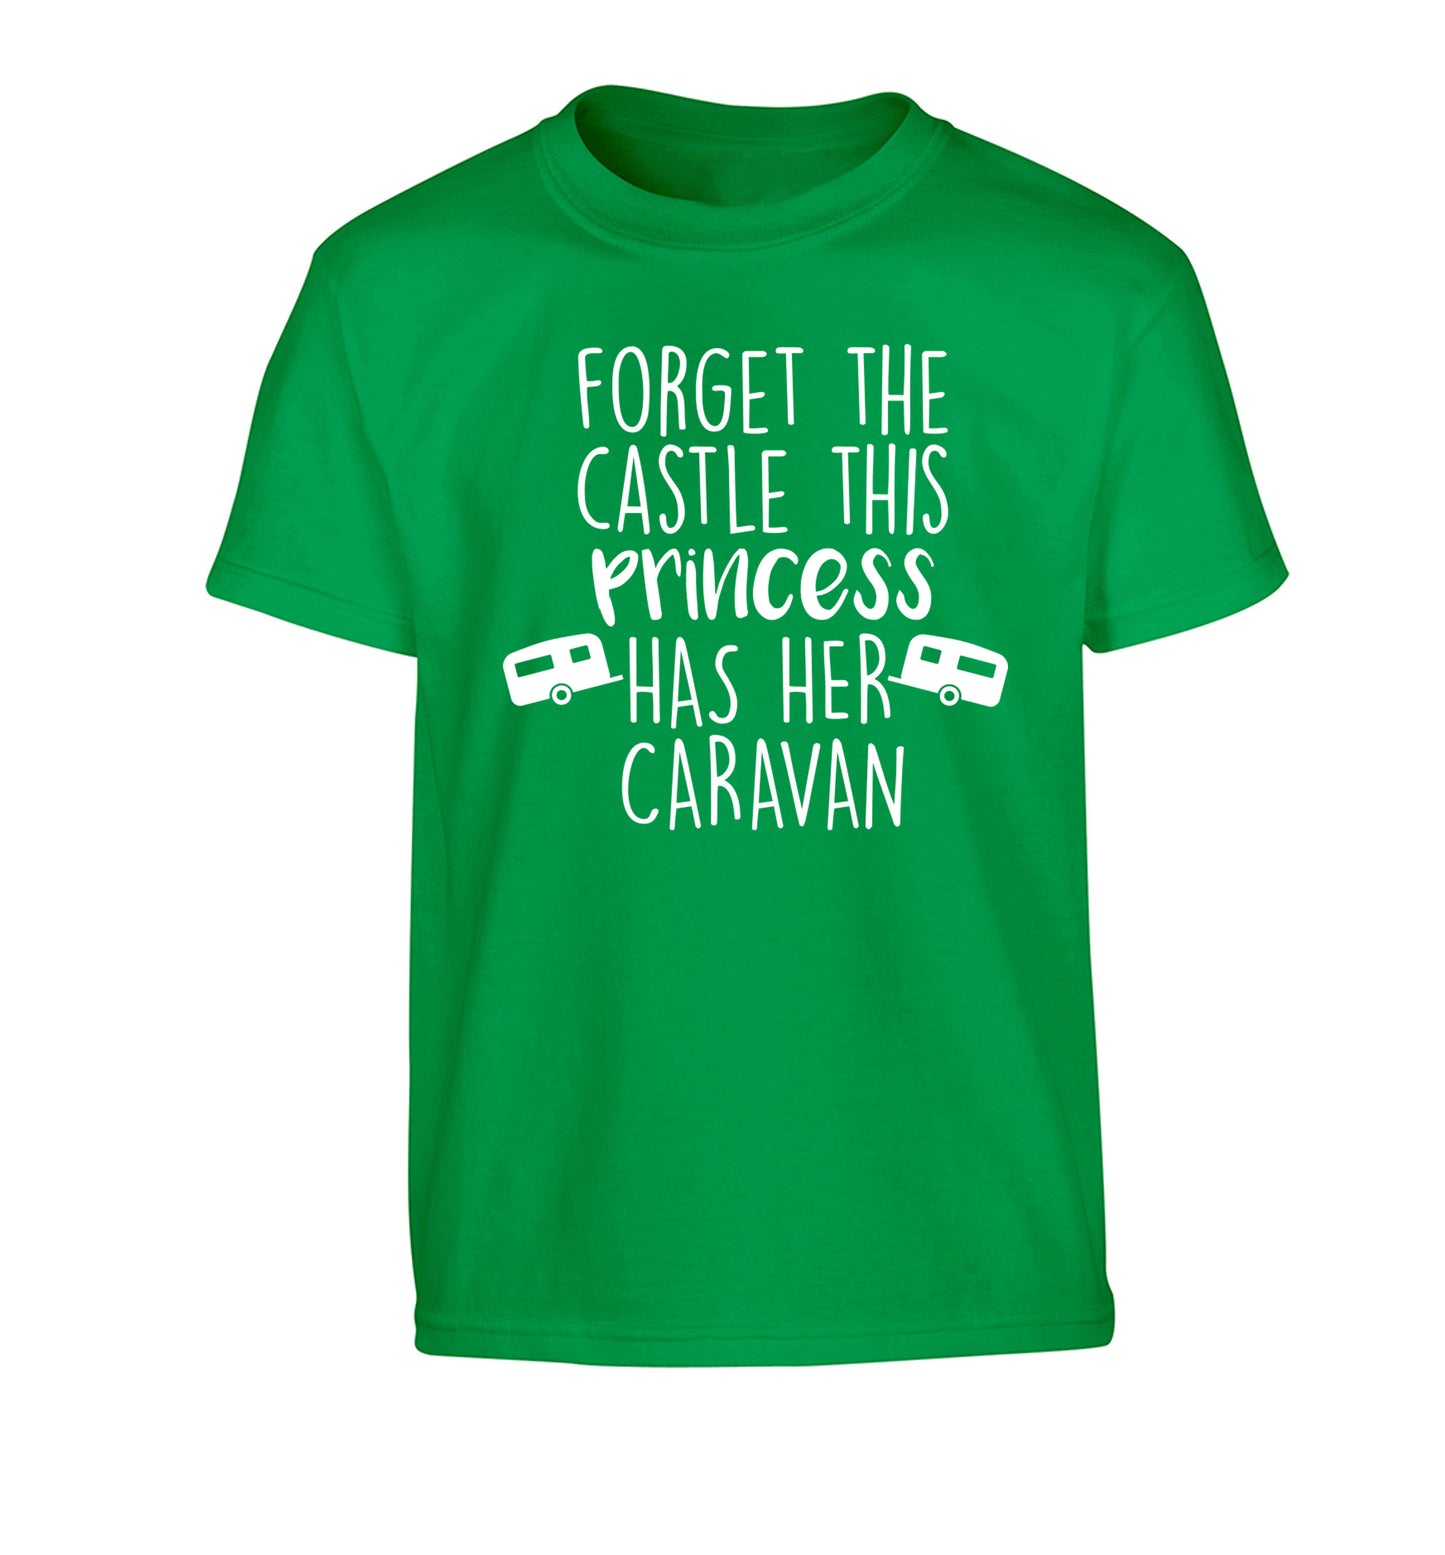 Forget the castle this princess lives at the caravan Children's green Tshirt 12-14 Years